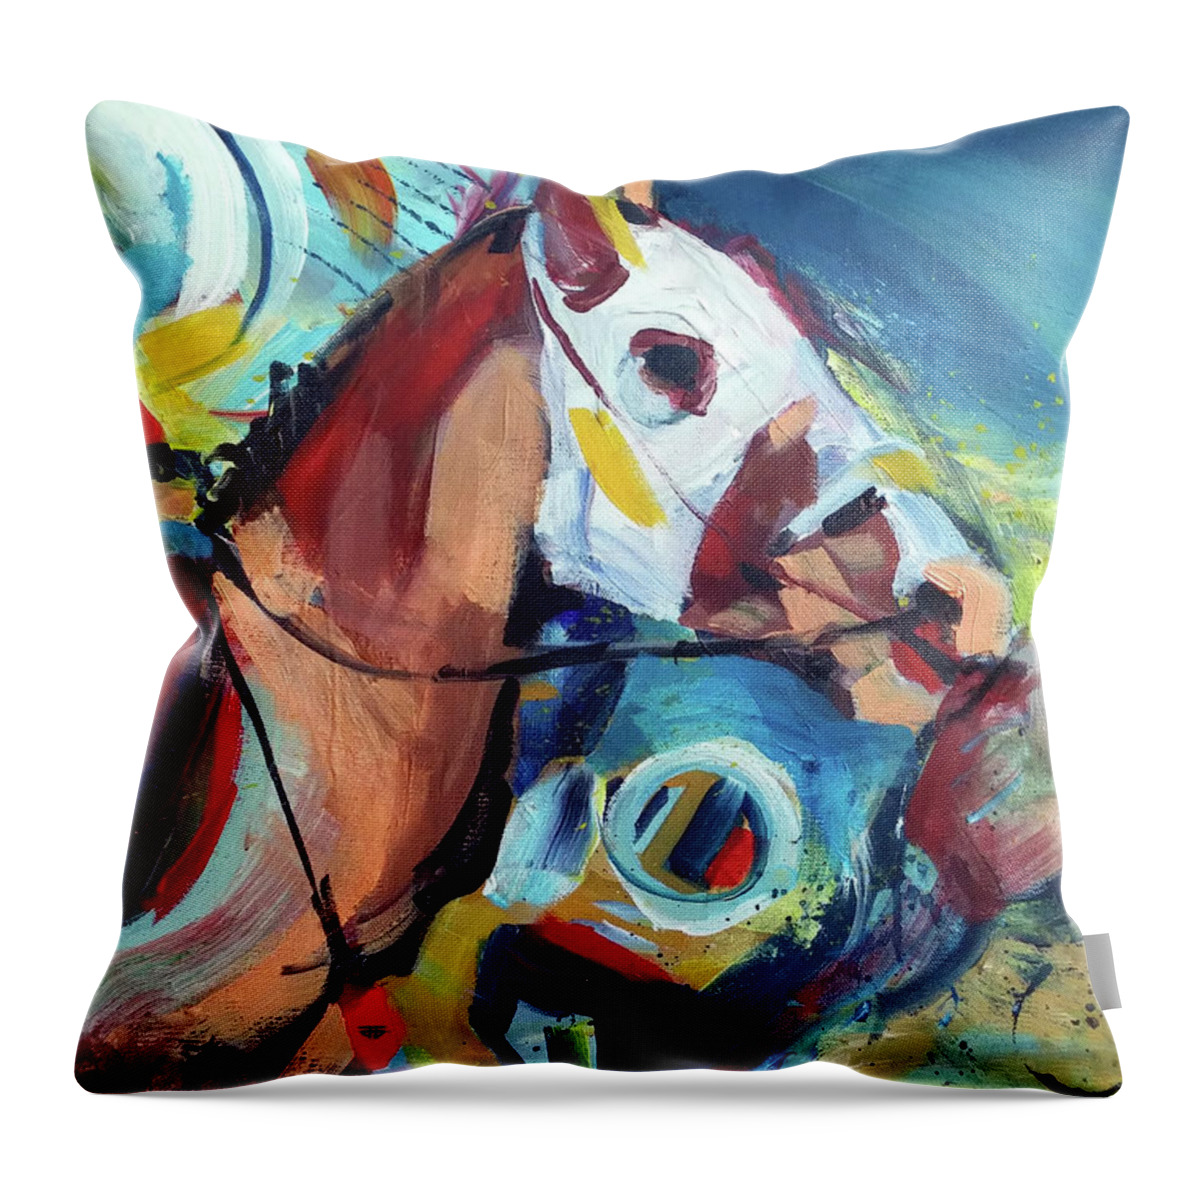 John Jr Gholson Throw Pillow featuring the painting Neck And Neck by John Gholson